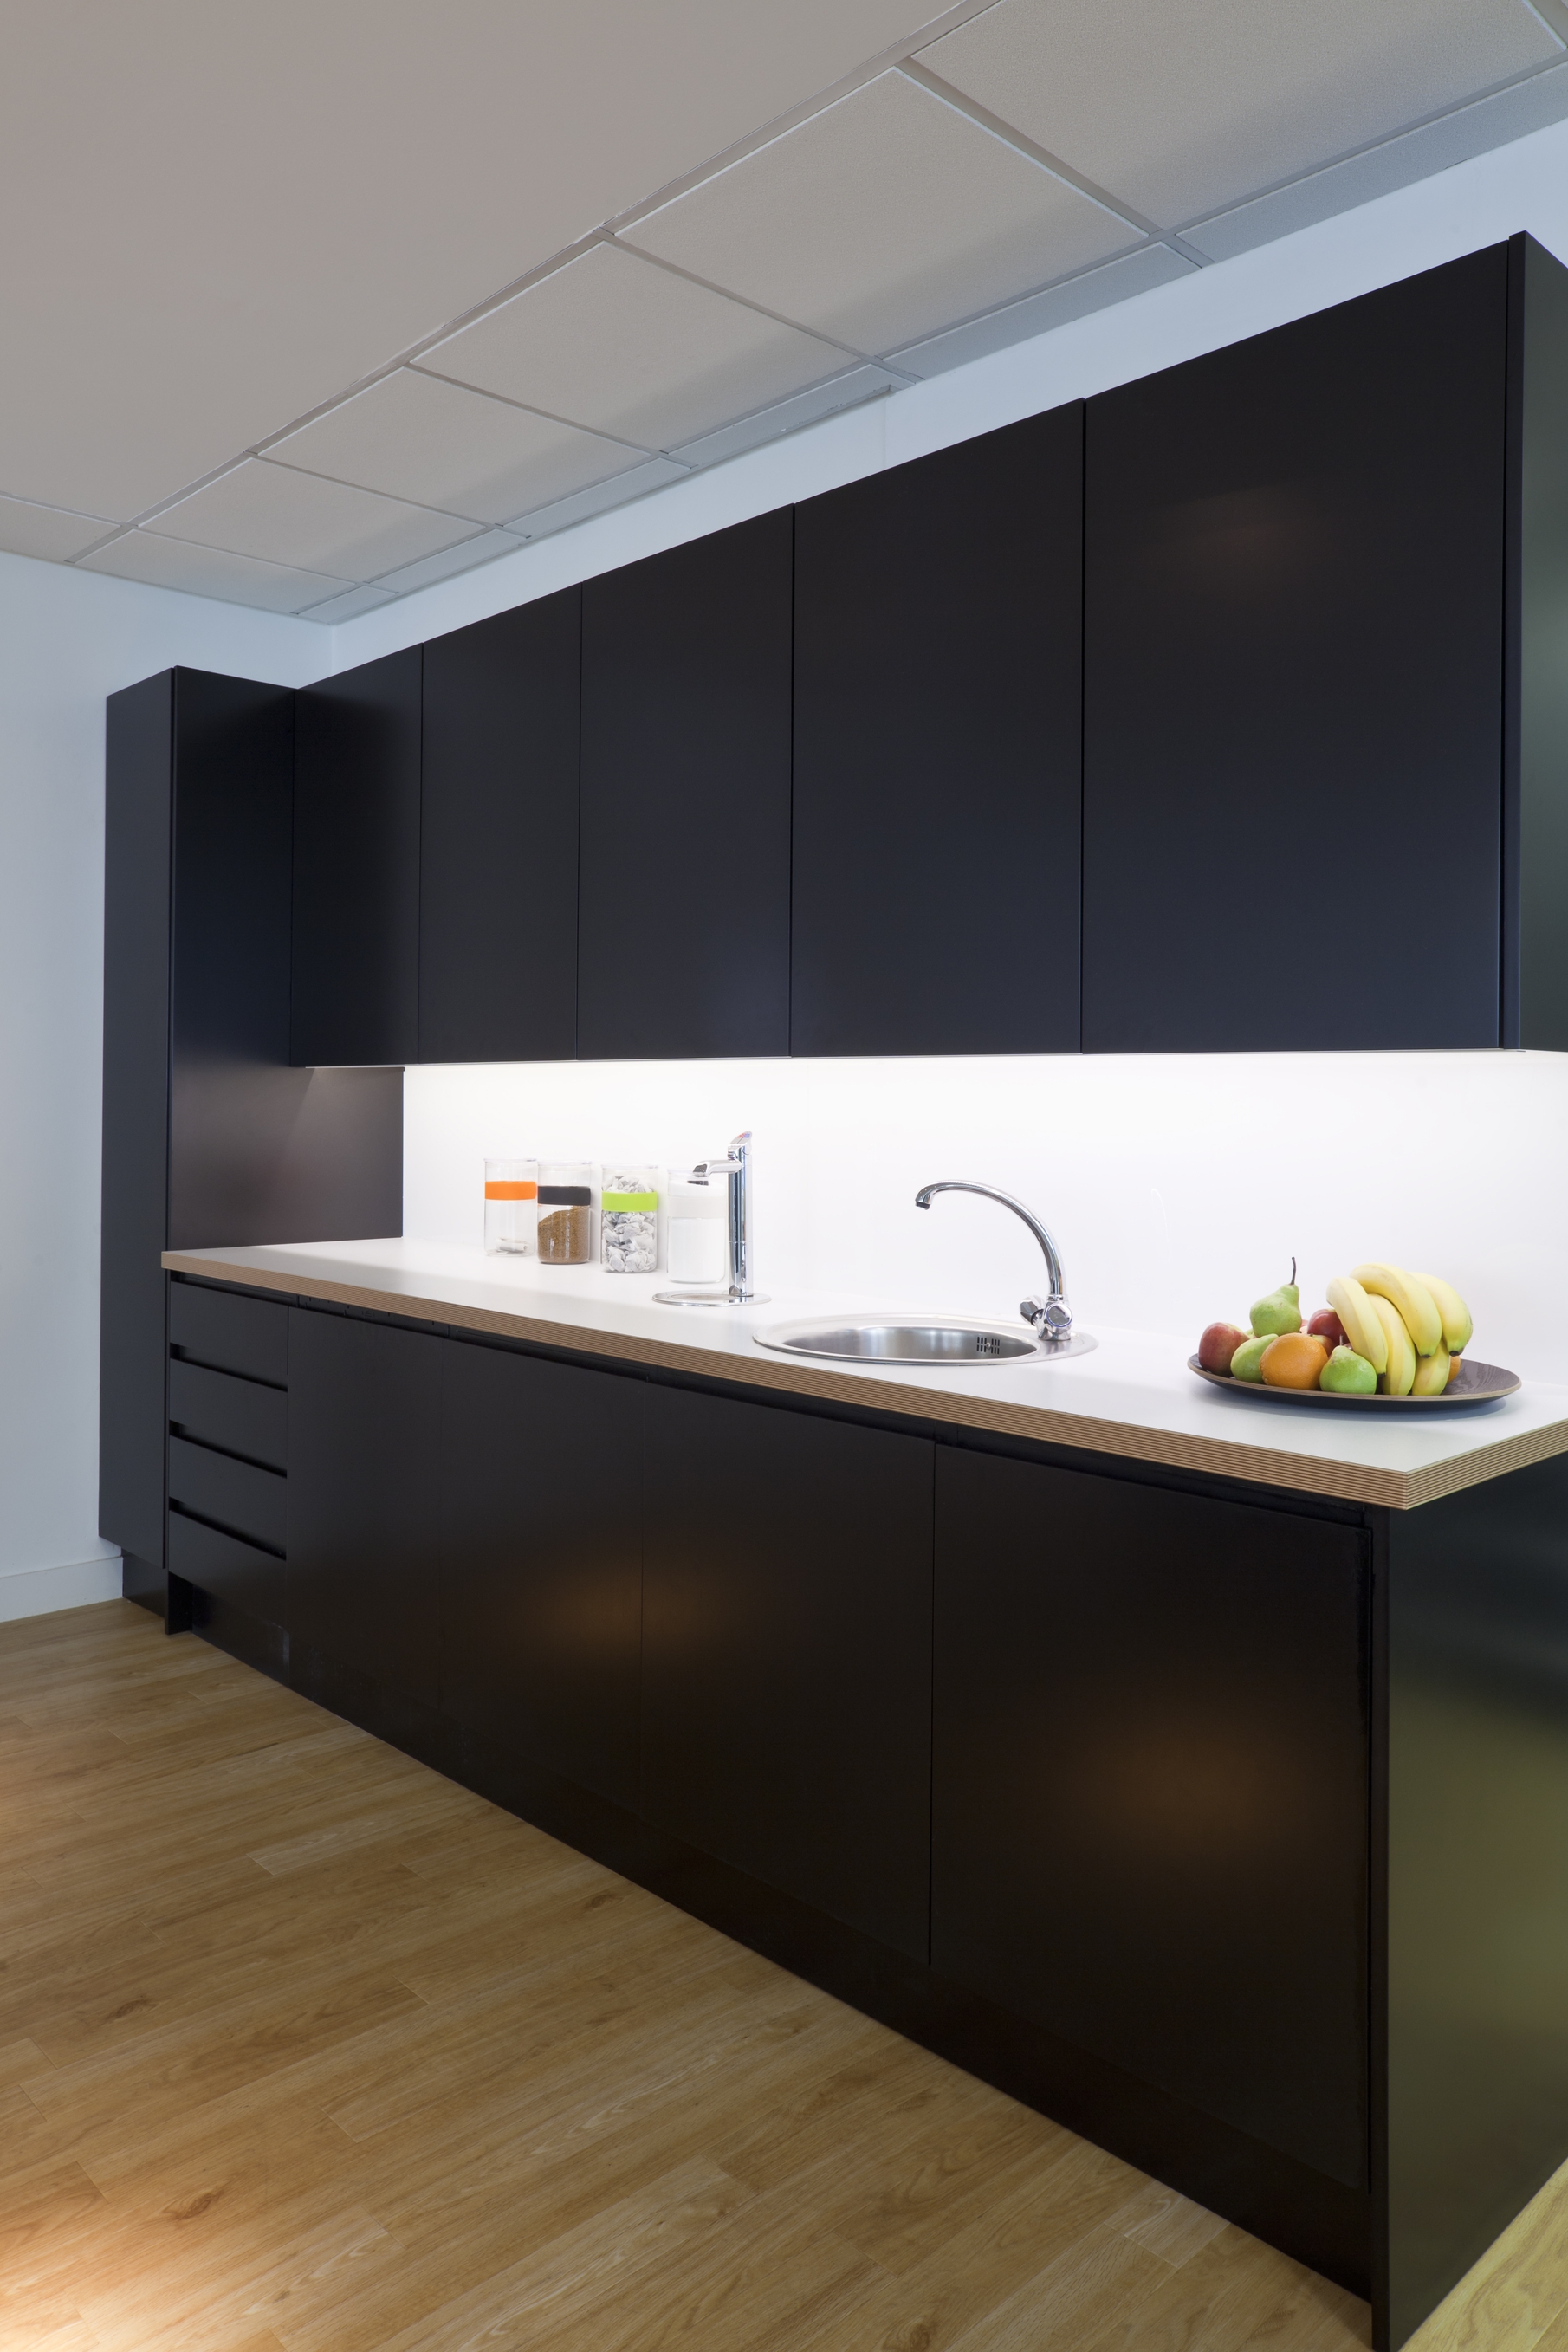 Stylish modern office kitchen area with sink and fruit bowl